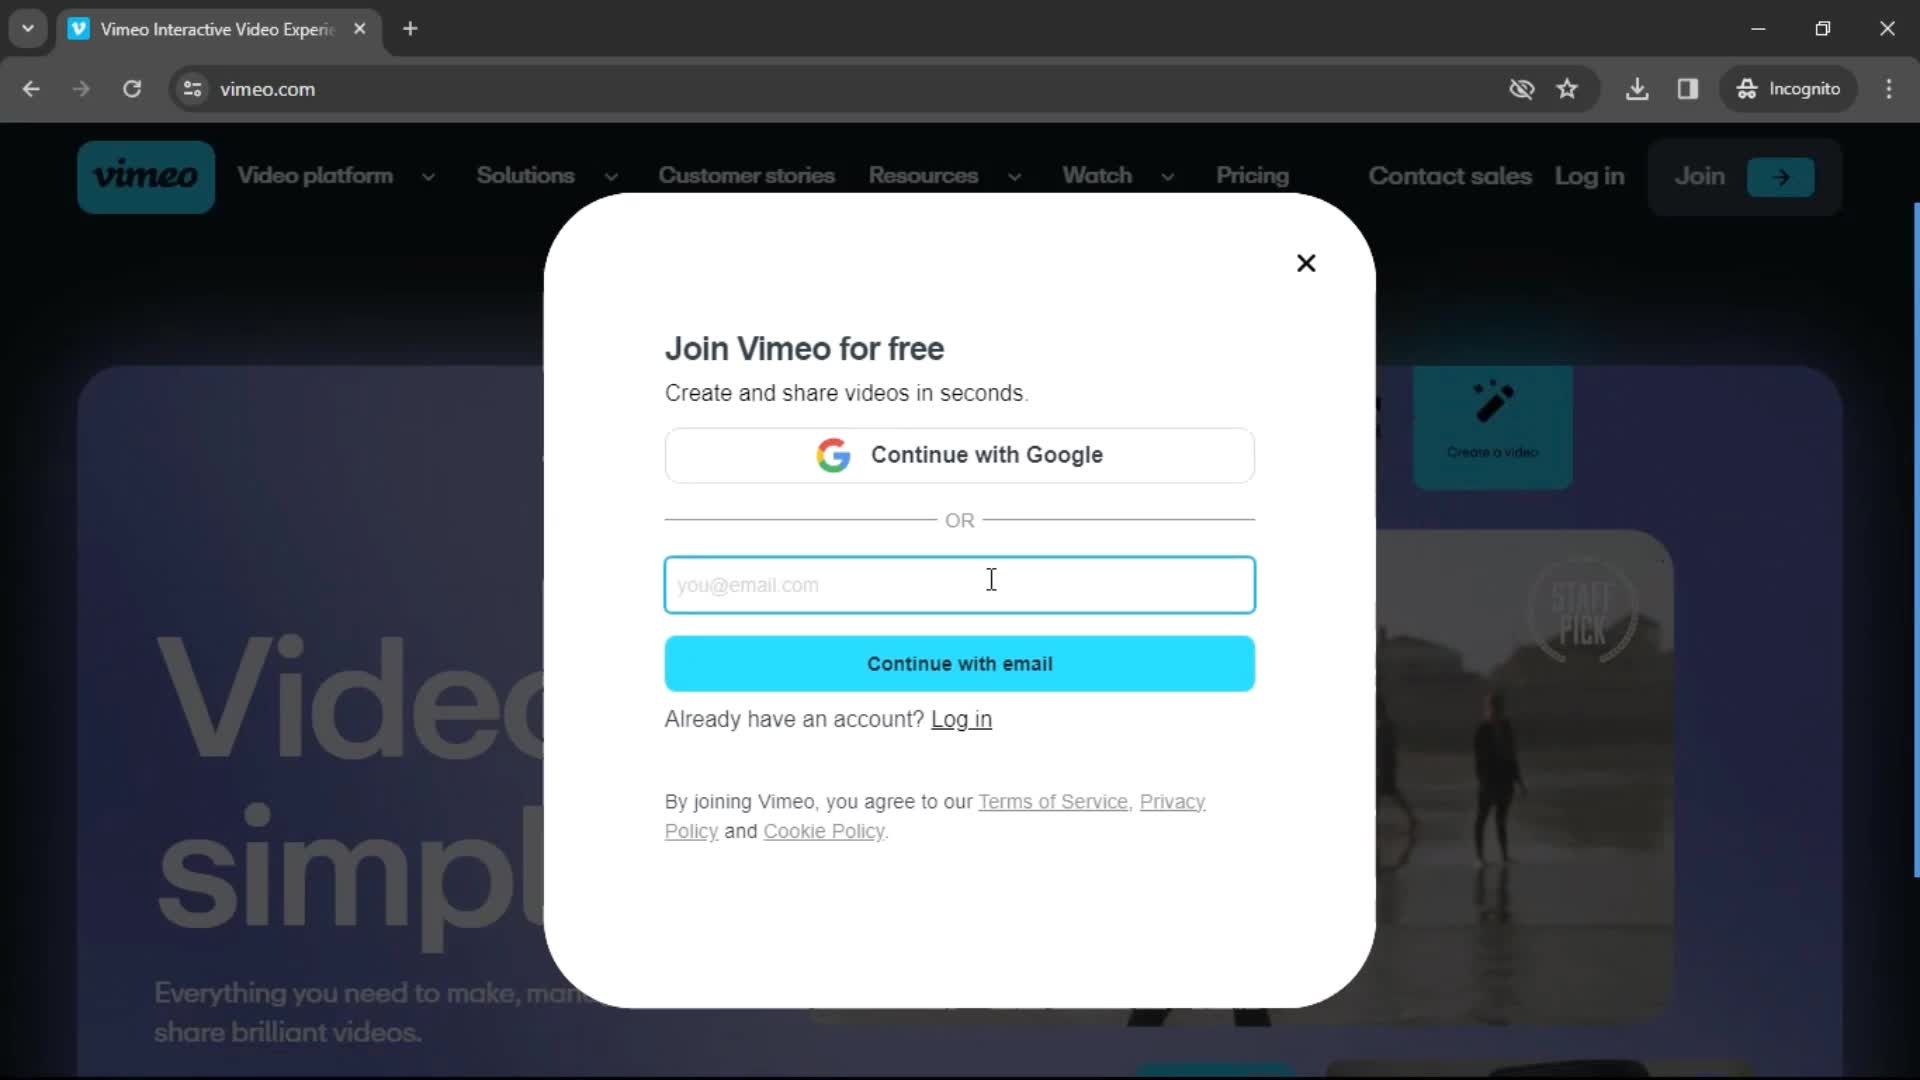 Screenshot of Enter email on Onboarding on Vimeo user flow